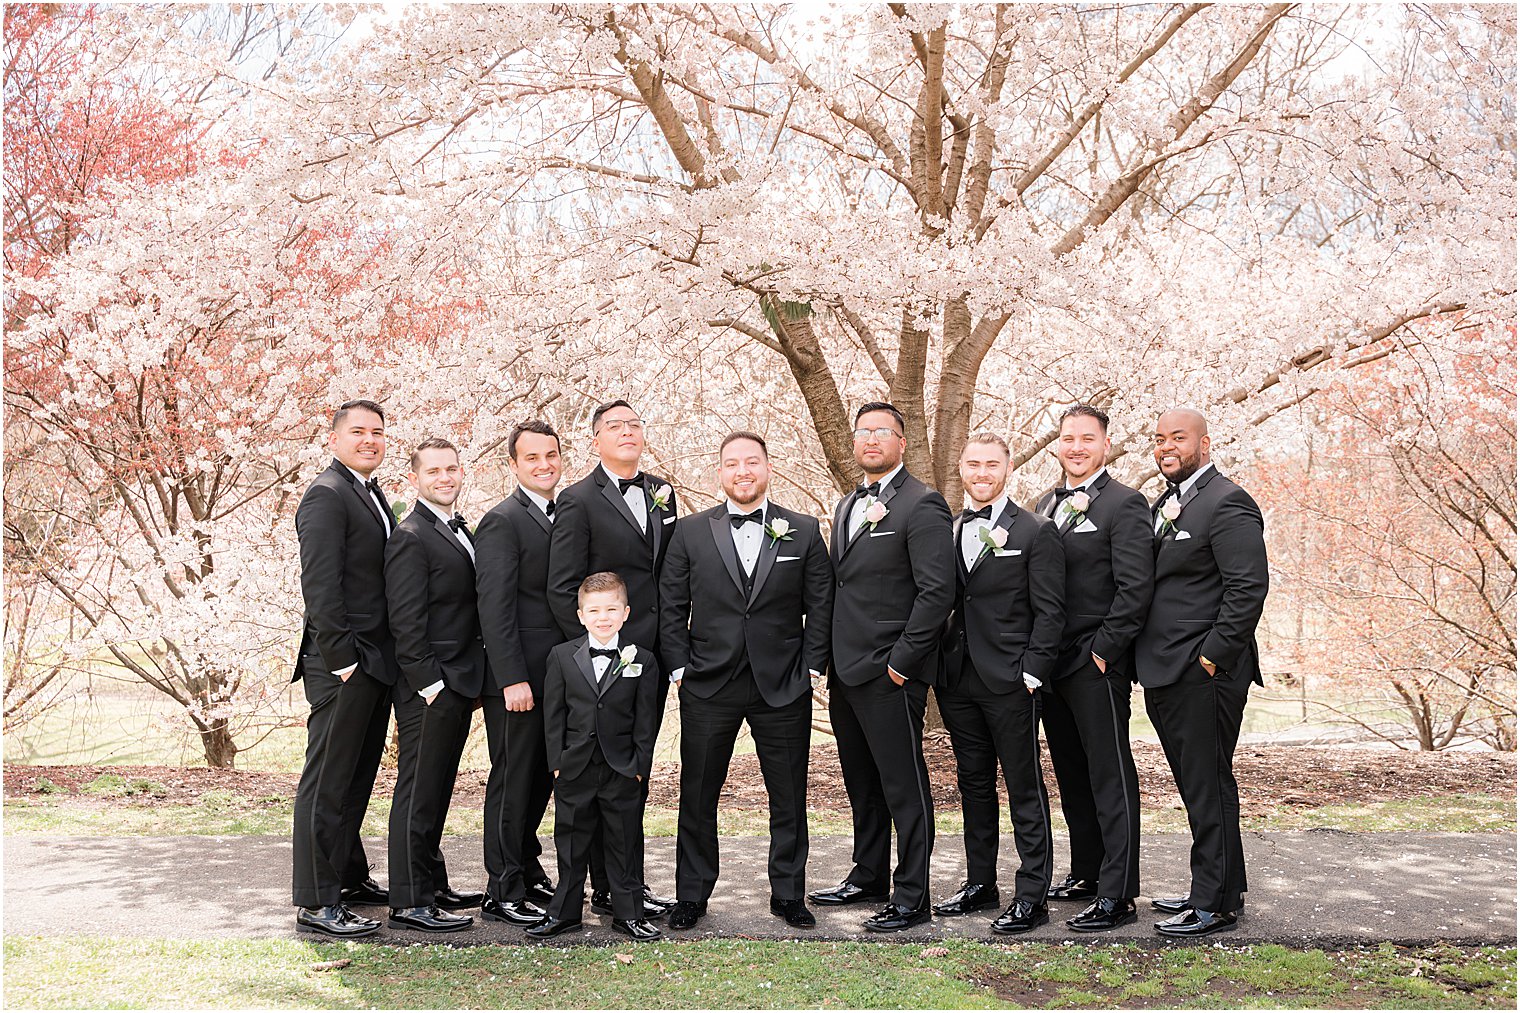 groom stands by groomsmen under cherry blossoms trees